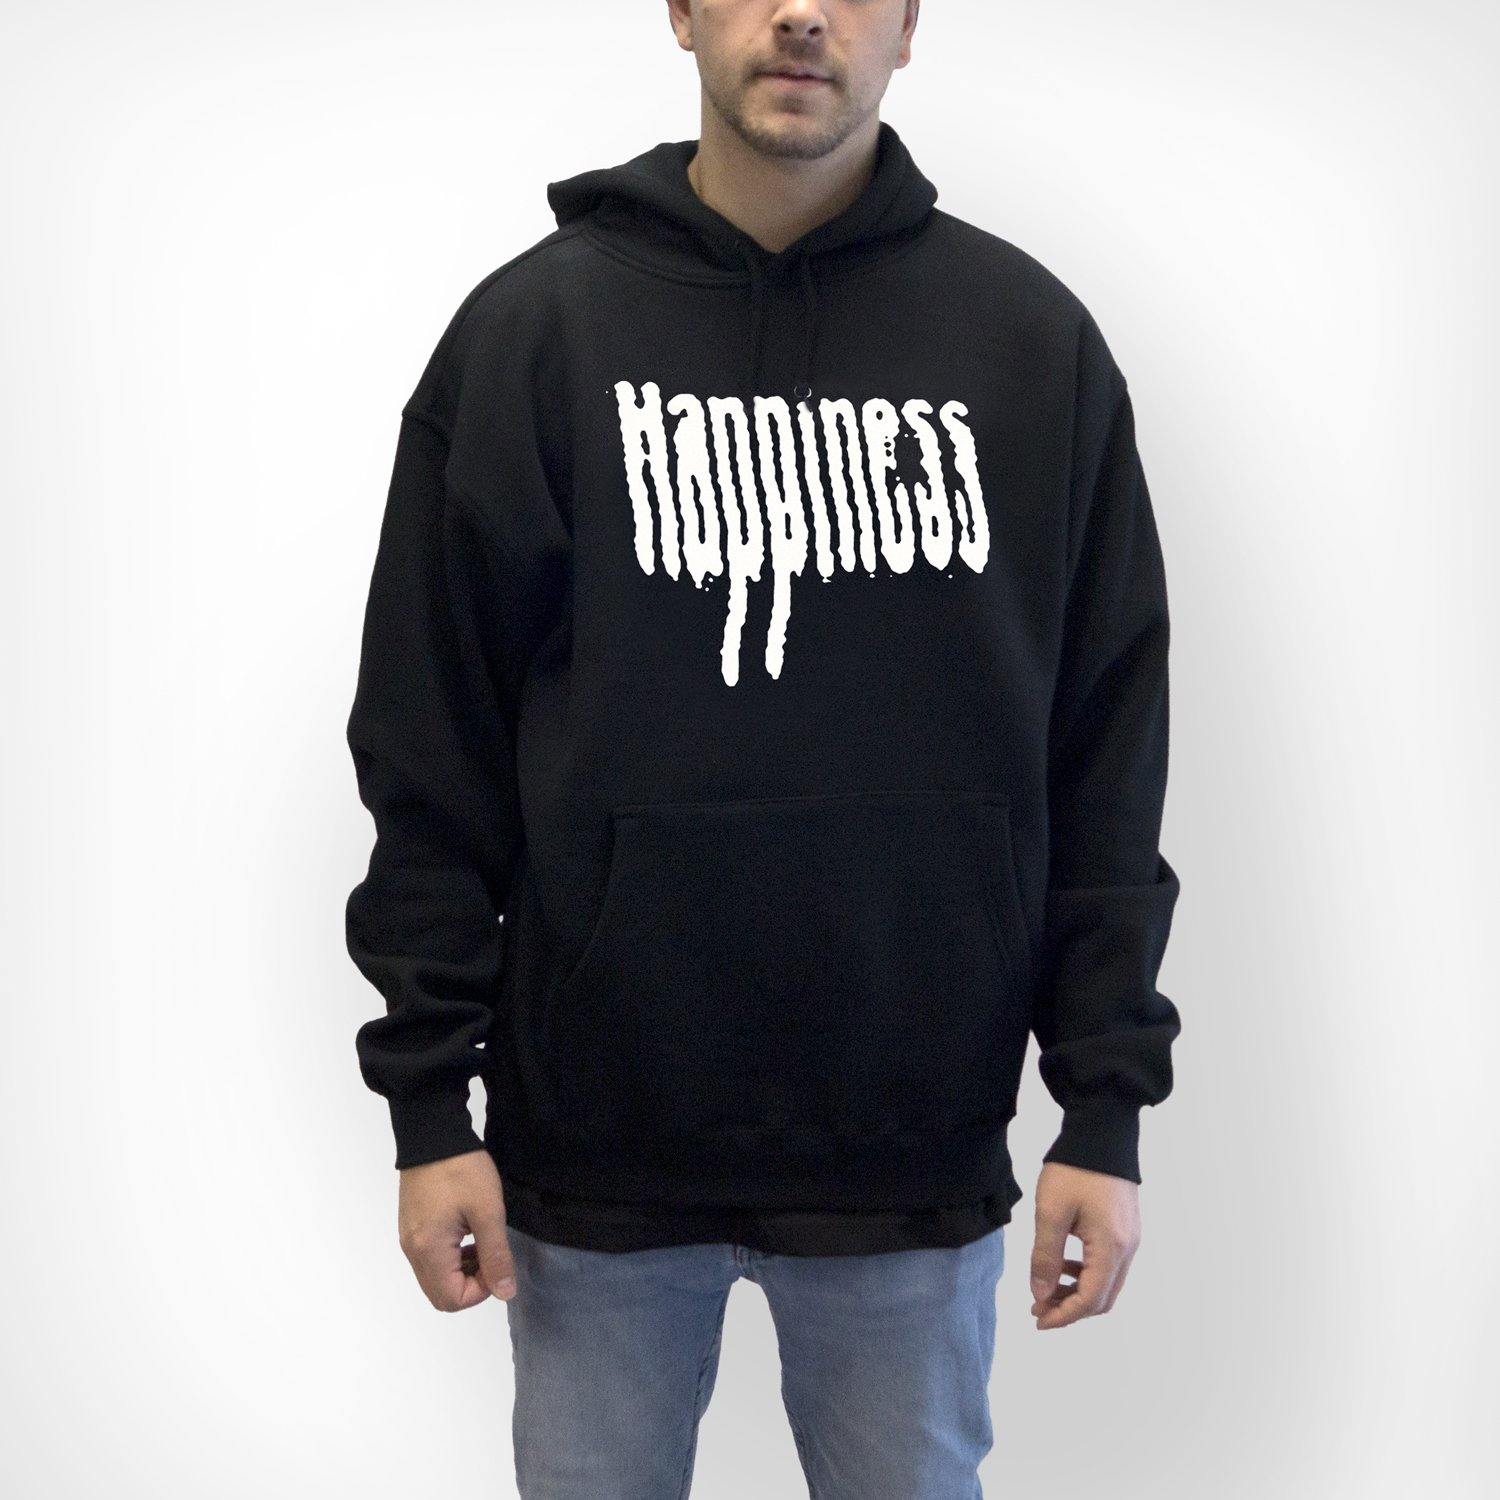 Buy – Happiness Hoodie – Cold Cuts Ltd